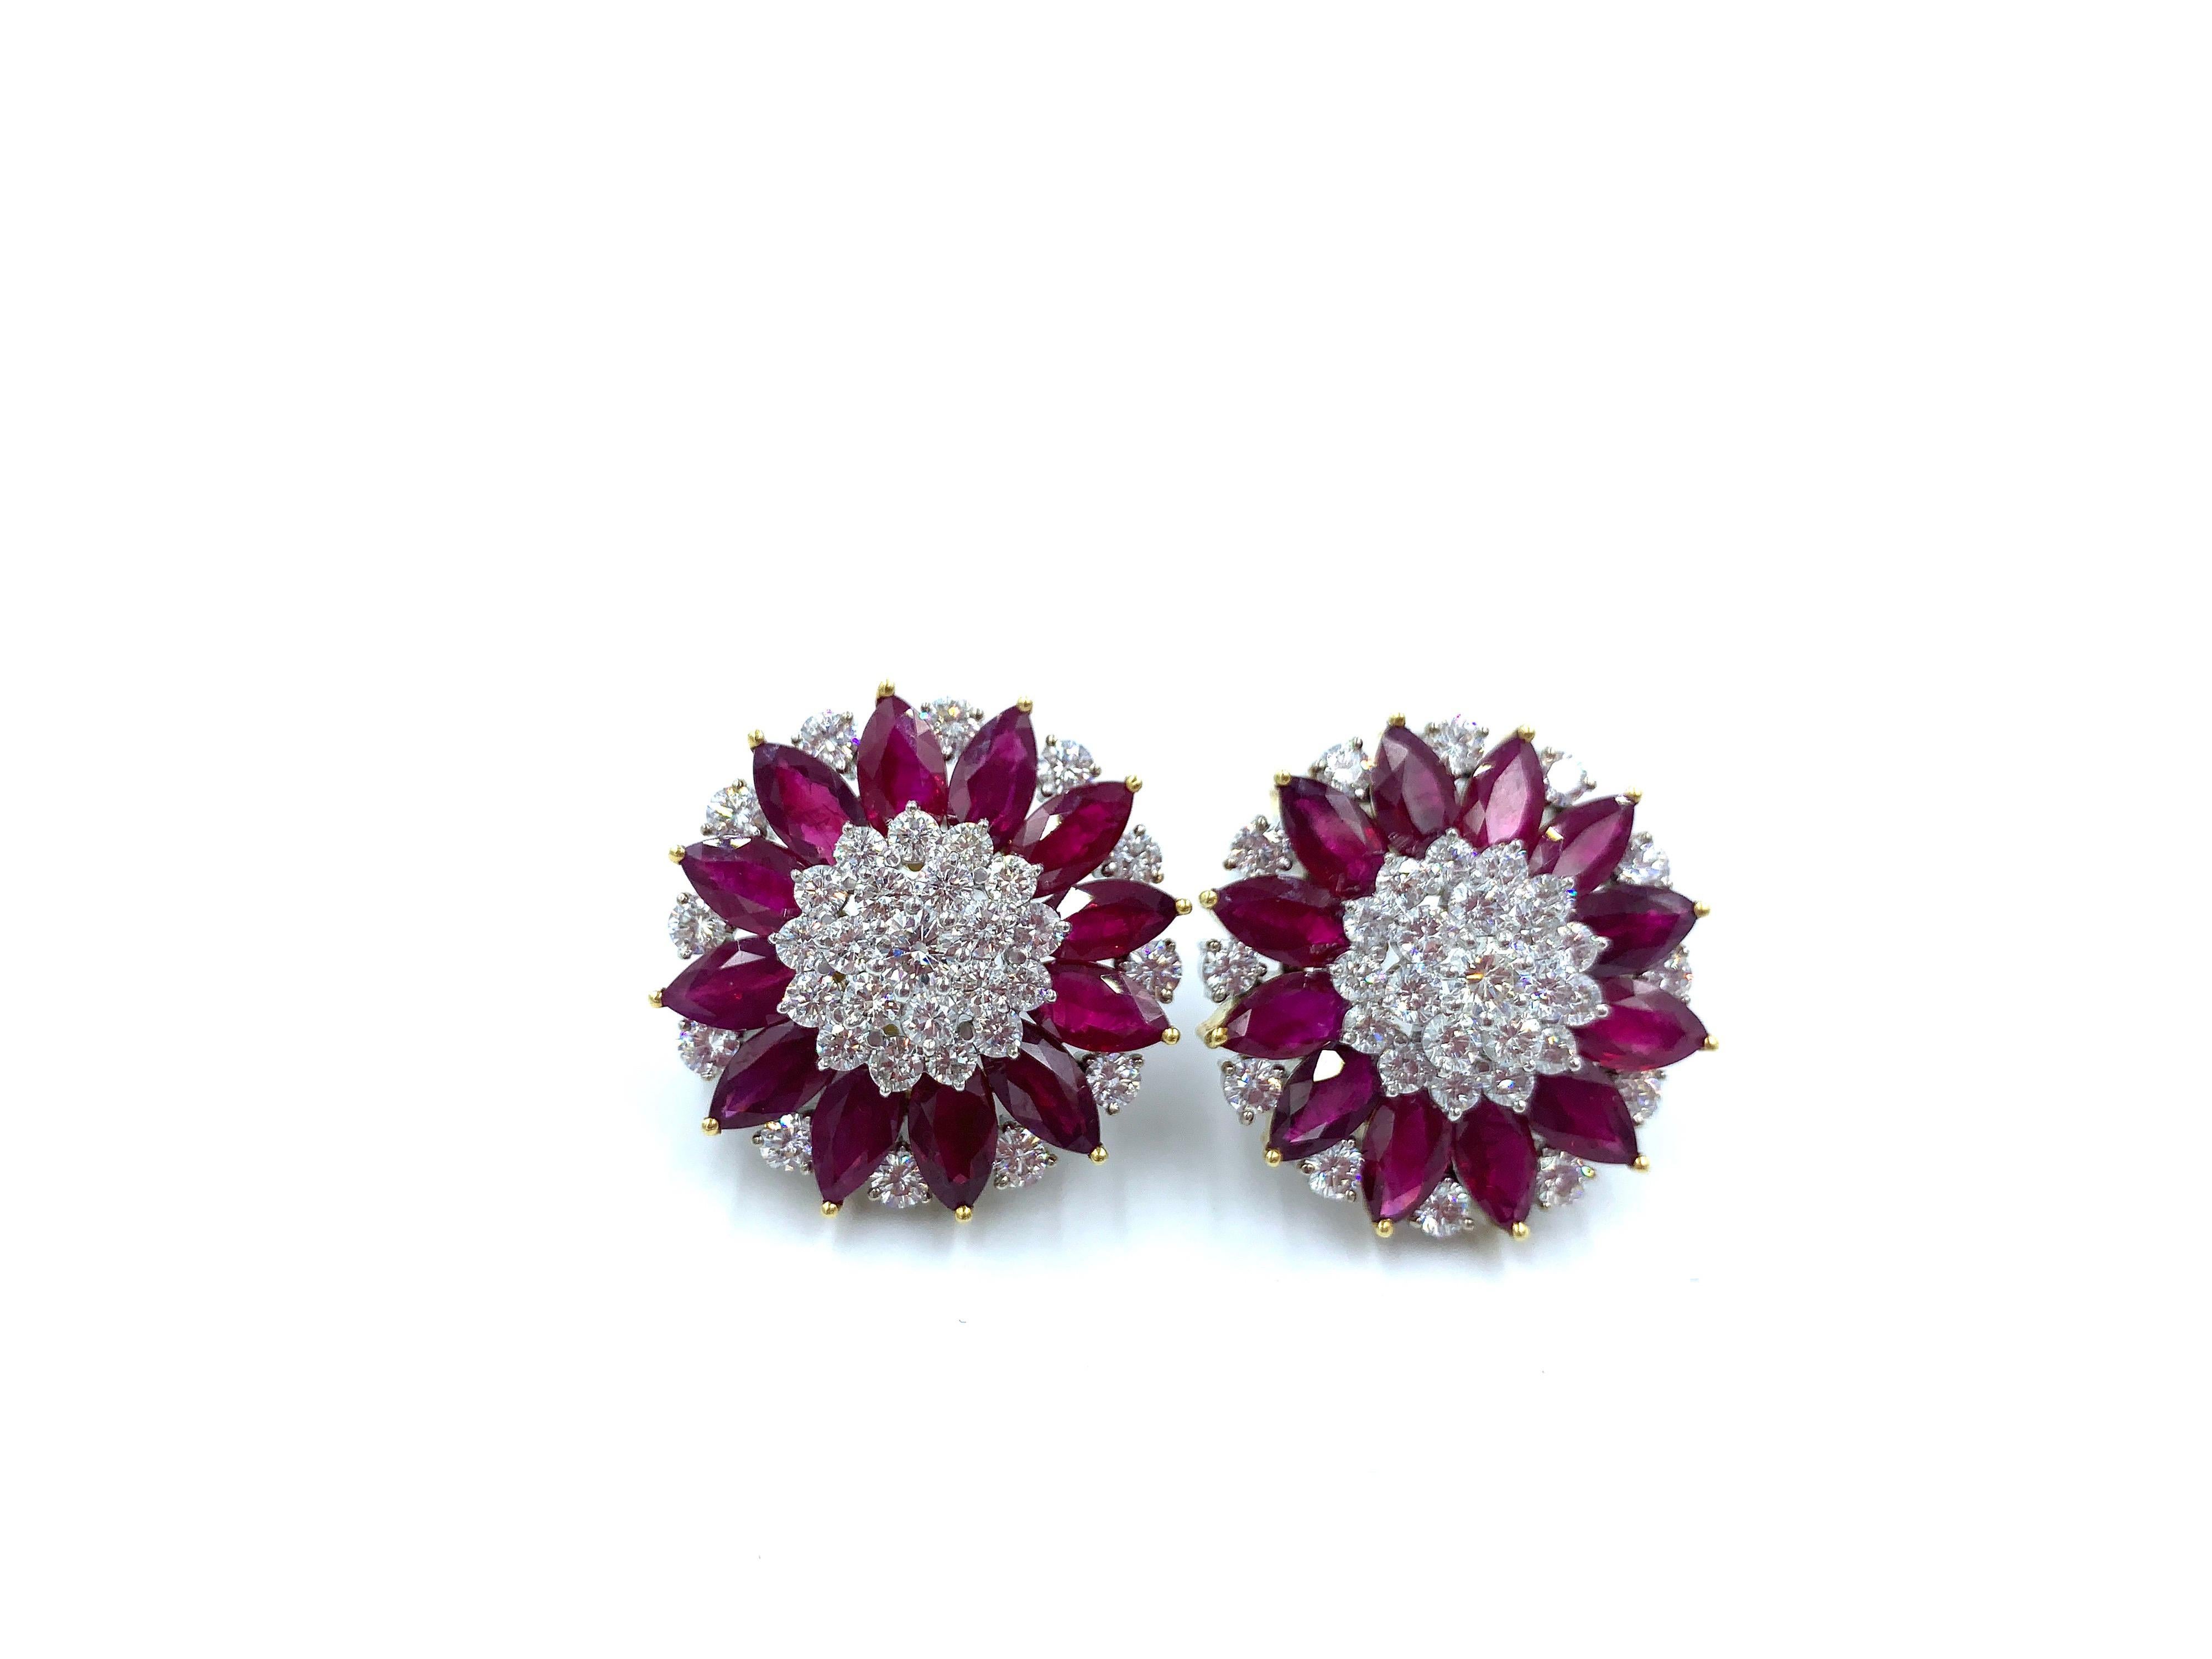 Bold and elegant earrings, shaped like pinwheels or flowers, in 18 kt white and yellow gold. Central clusters of diamonds are surrounded with vibrant red marquis shaped rubies and diamonds. There are 32 carats of rubies and 7.40 carats of diamonds